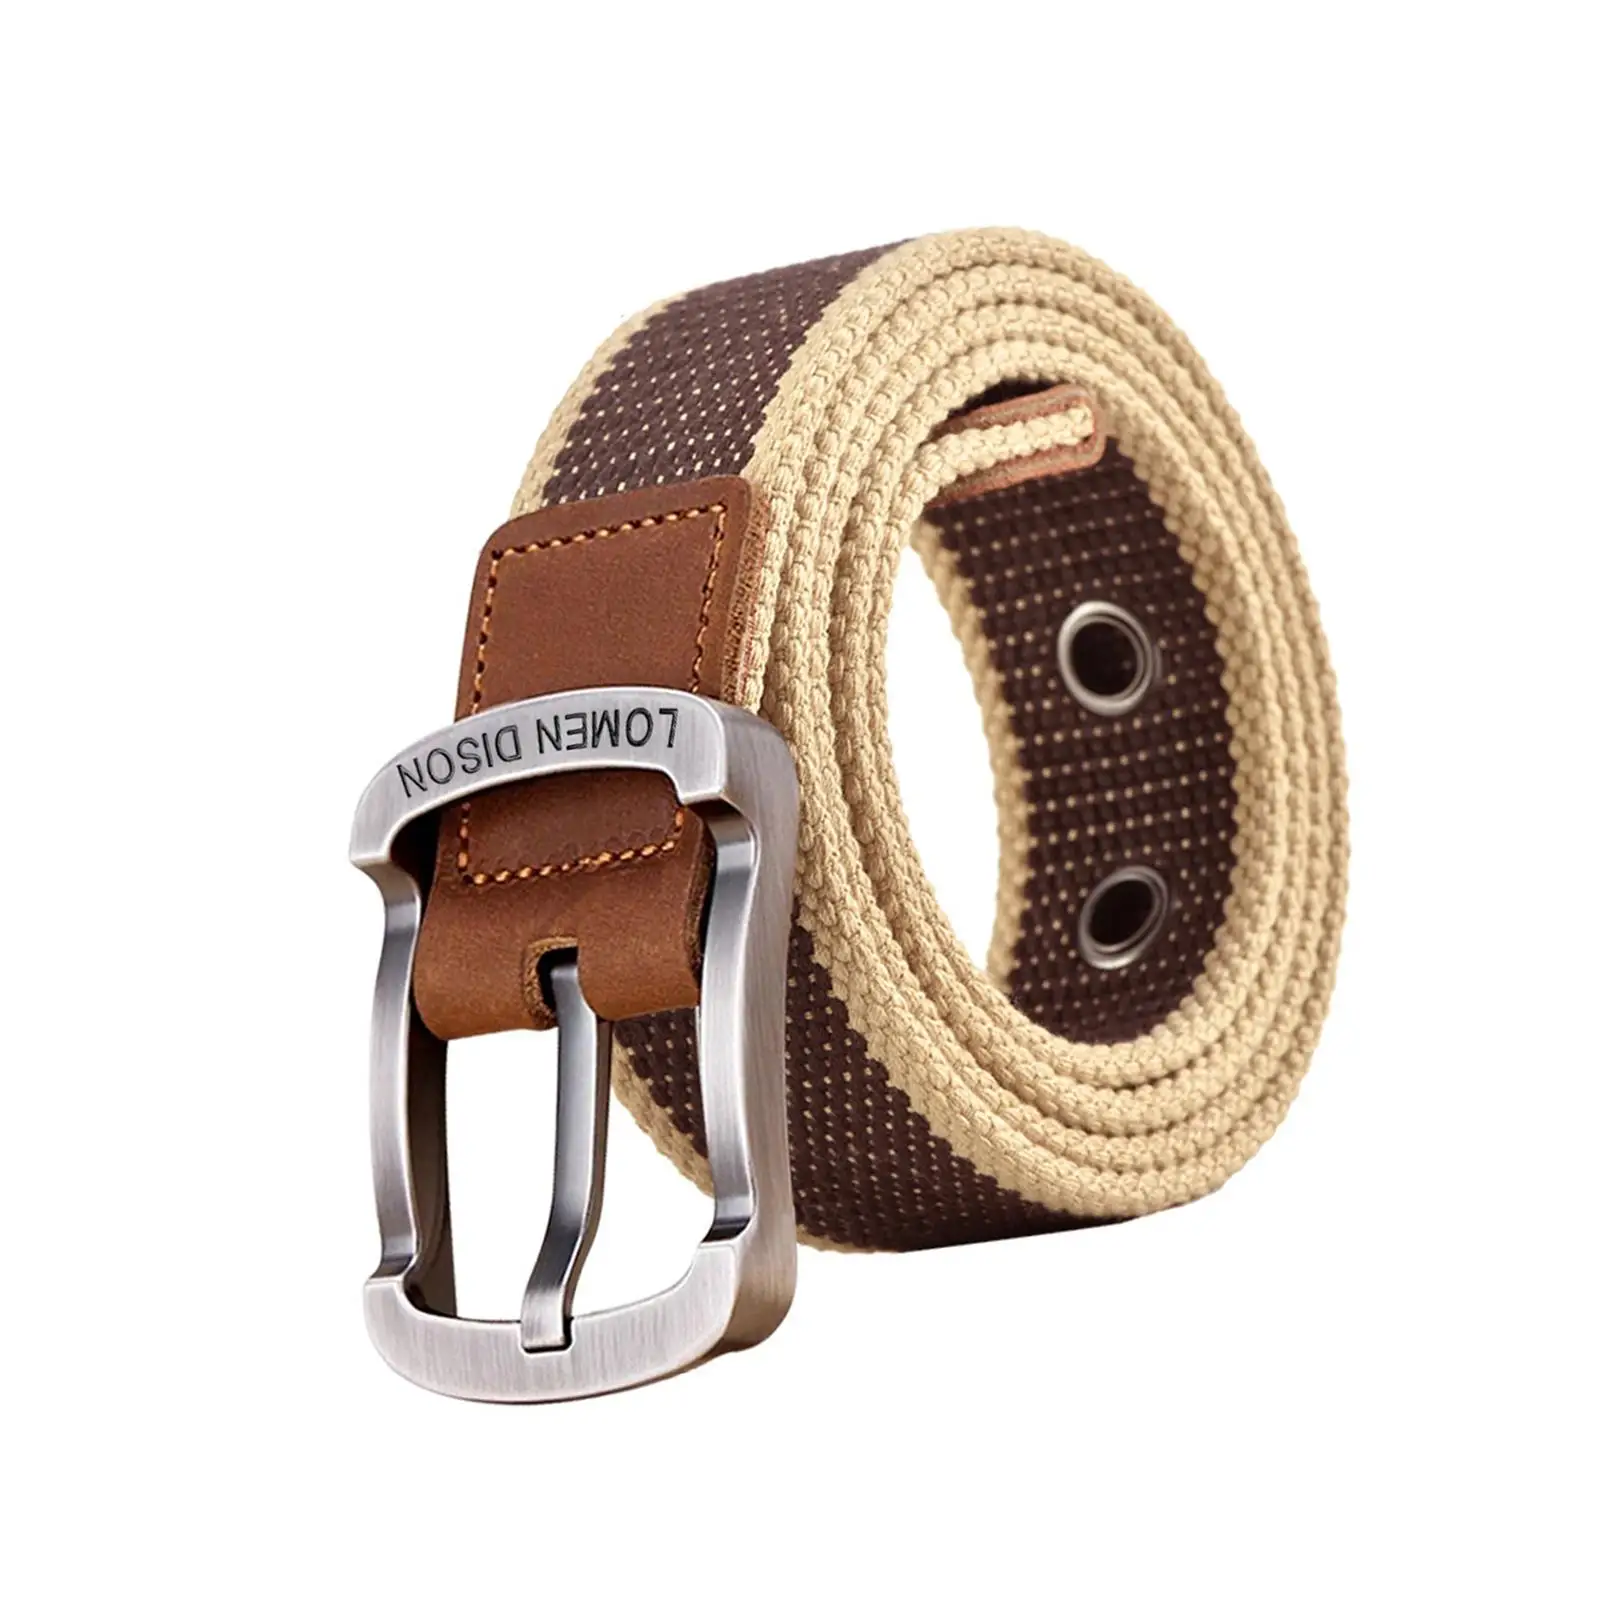 Canvas Belt Pin Buckle Fabric Woven Webbing Belt Wide Training Belt Casual Fashion Strap for Sports Business Work Adult Unisex